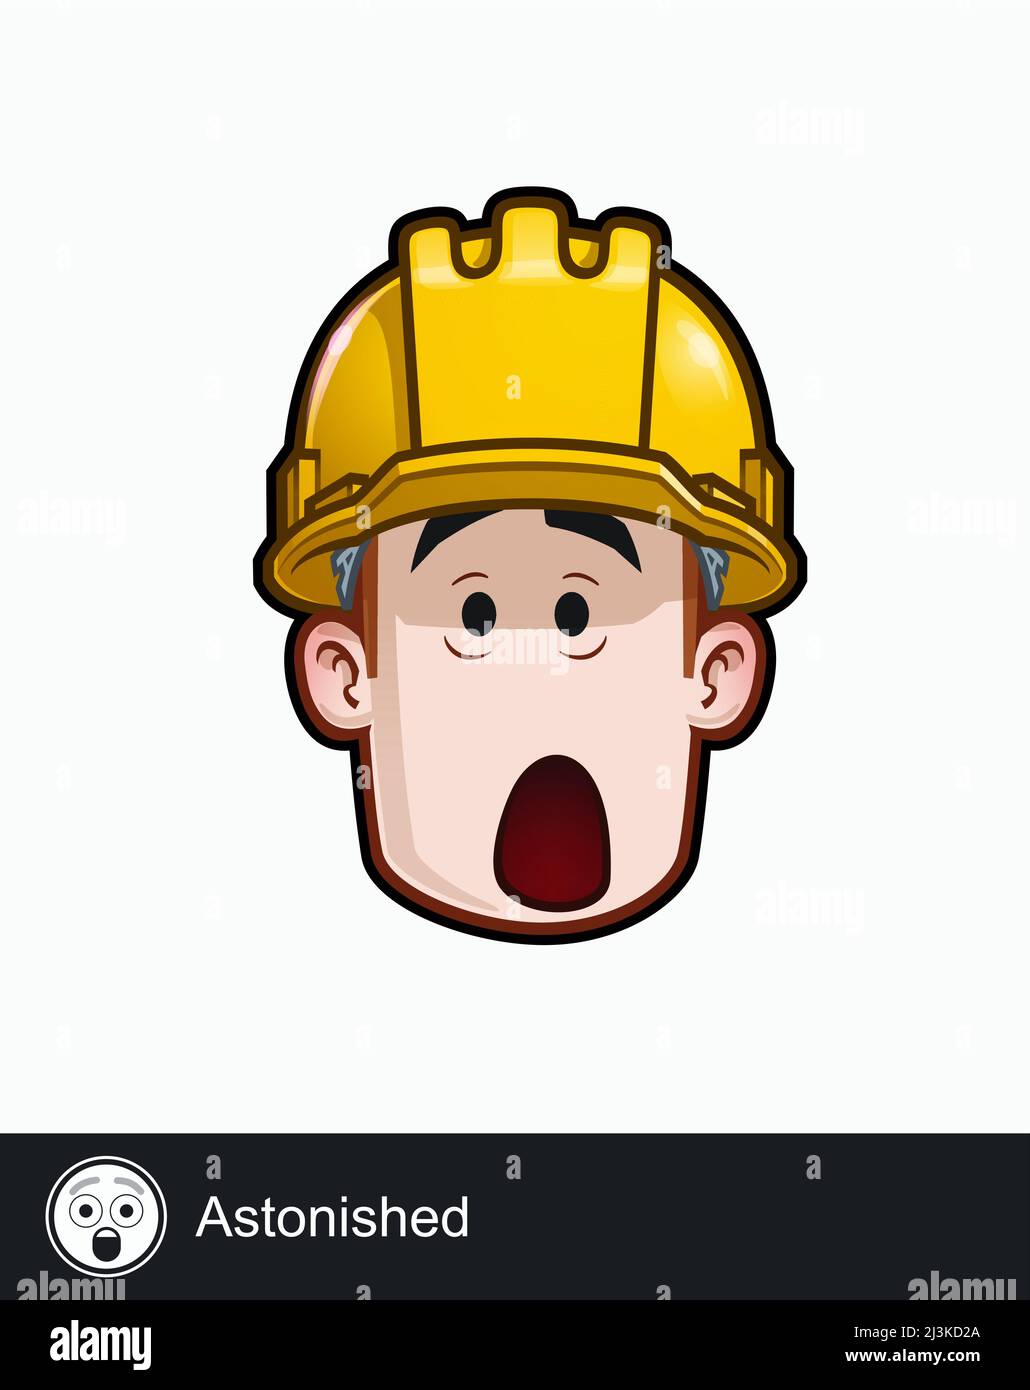 Icon of a construction worker face with Astonished emotional expression. All elements neatly on well described layers and groups. Stock Vector